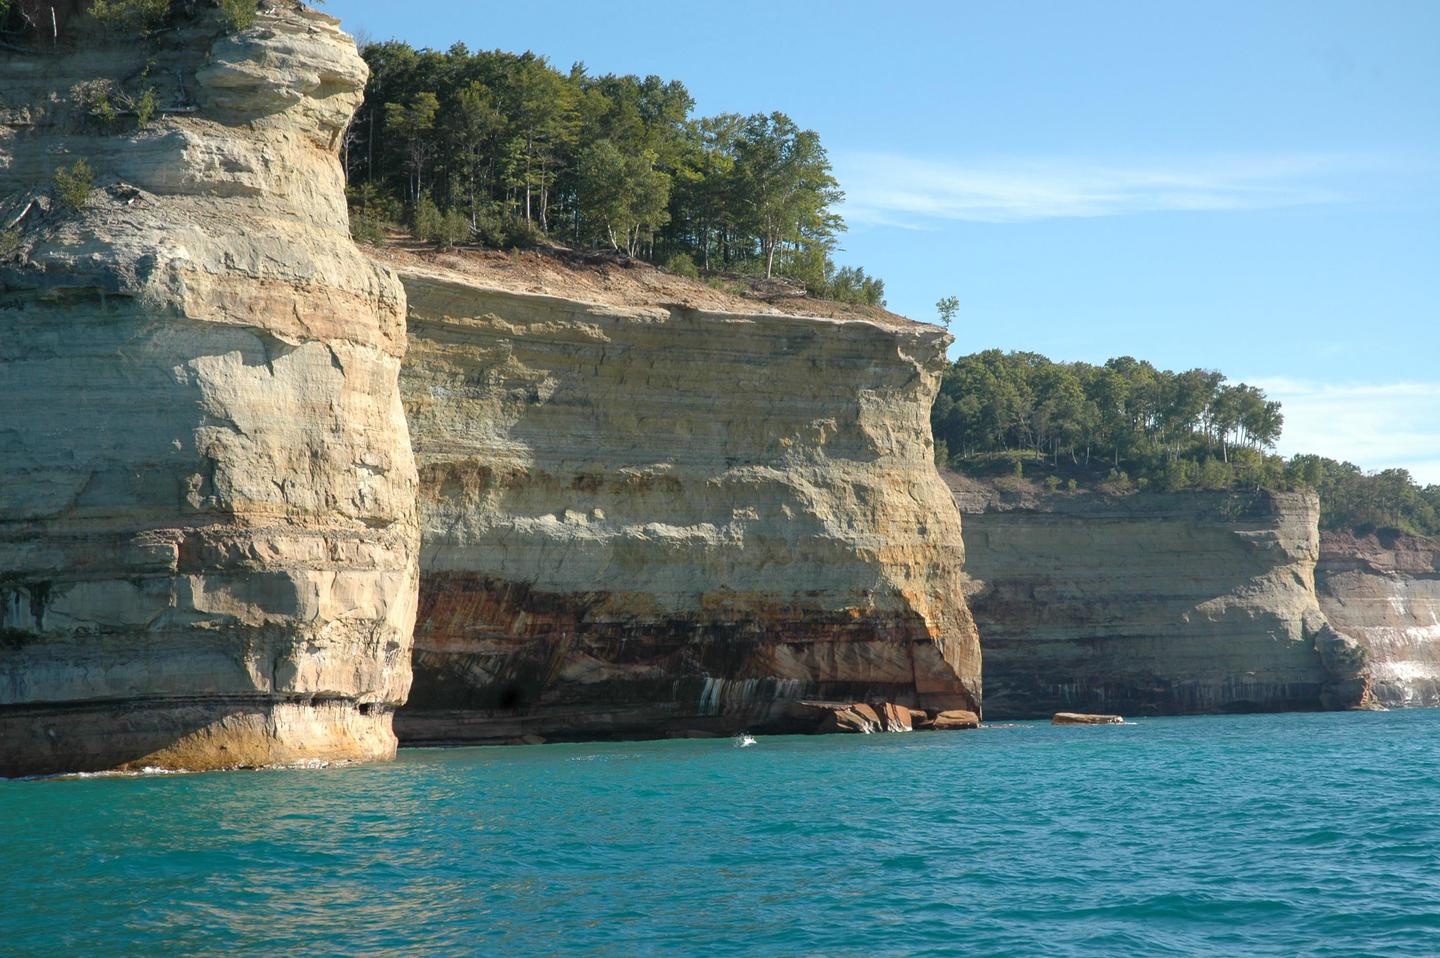 Battleship Row15 miles of carved and colorful cliffs along the Lake Superior shoreine.